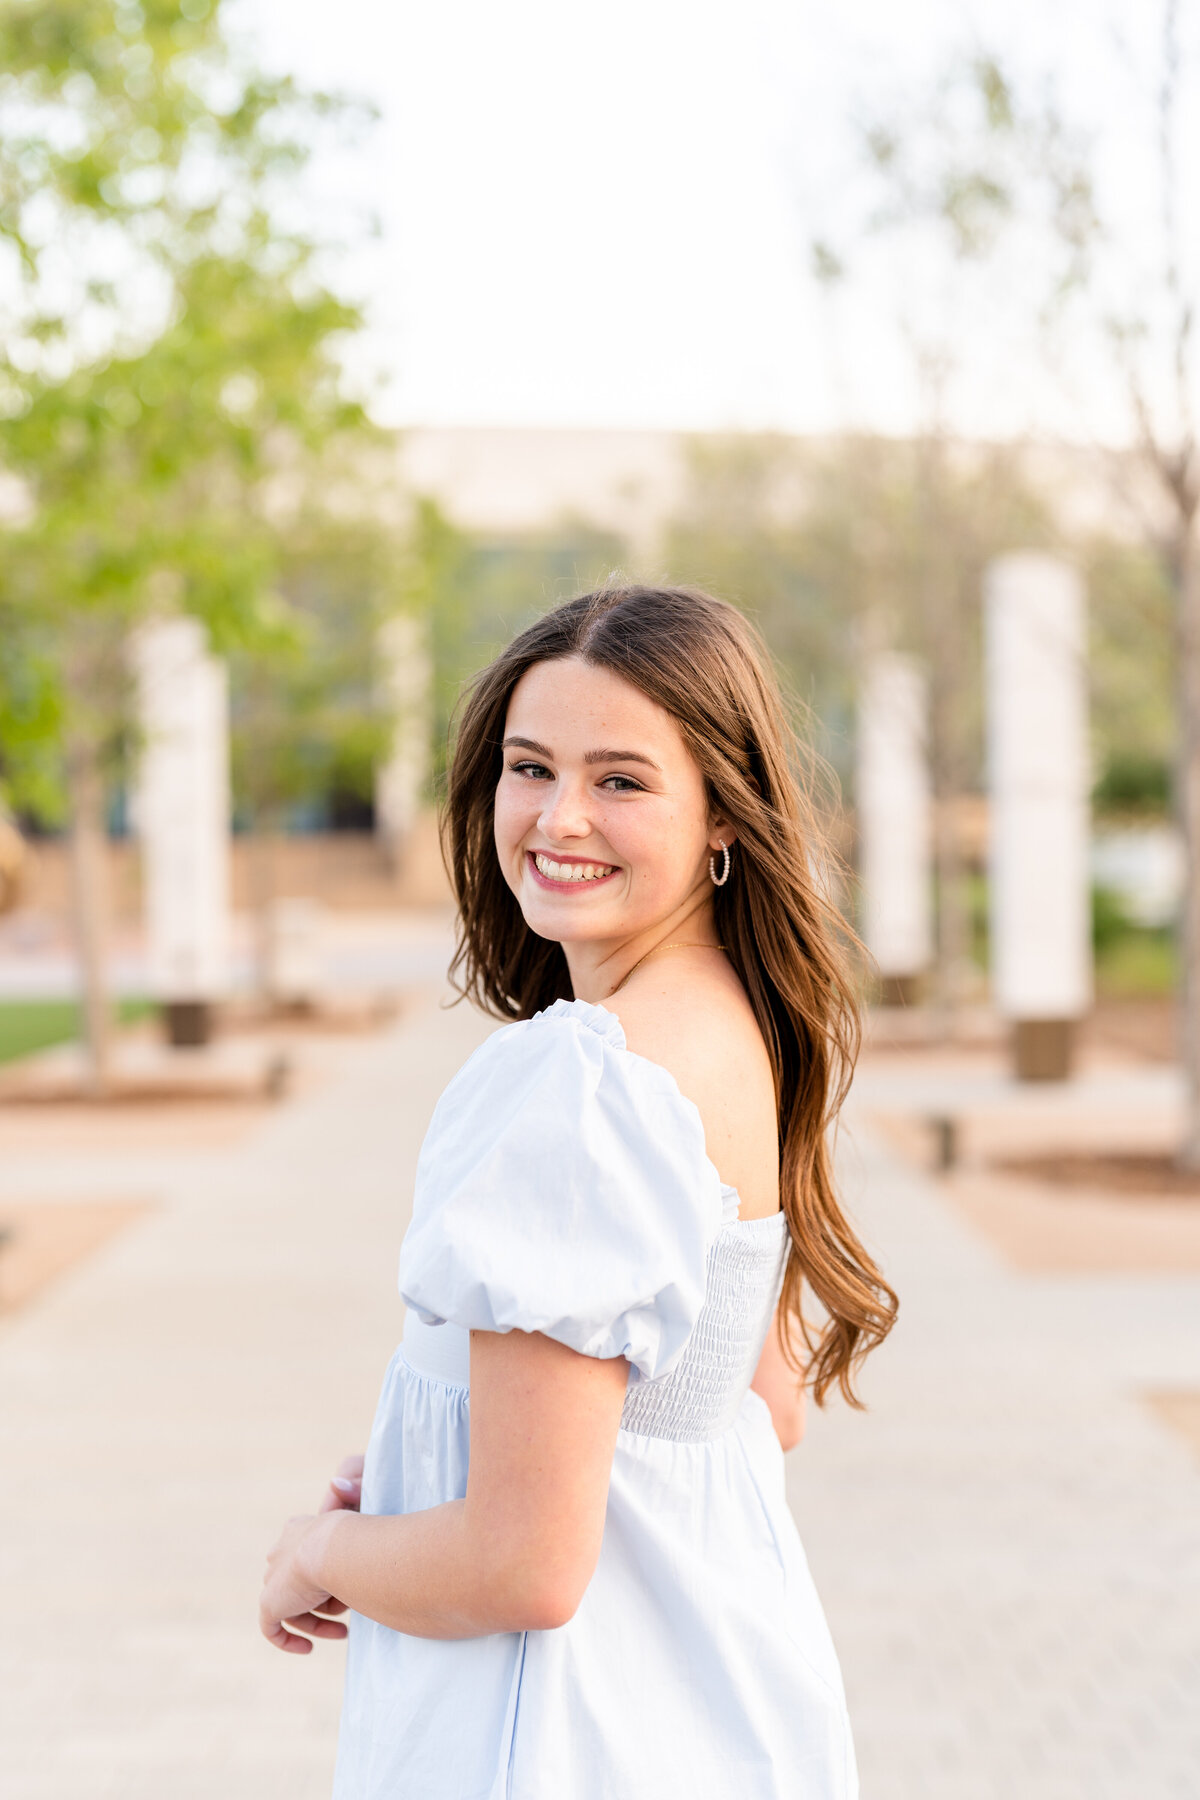 Texas A&M senior girl looking over shoulder while wearing blue dress in Aggie Park